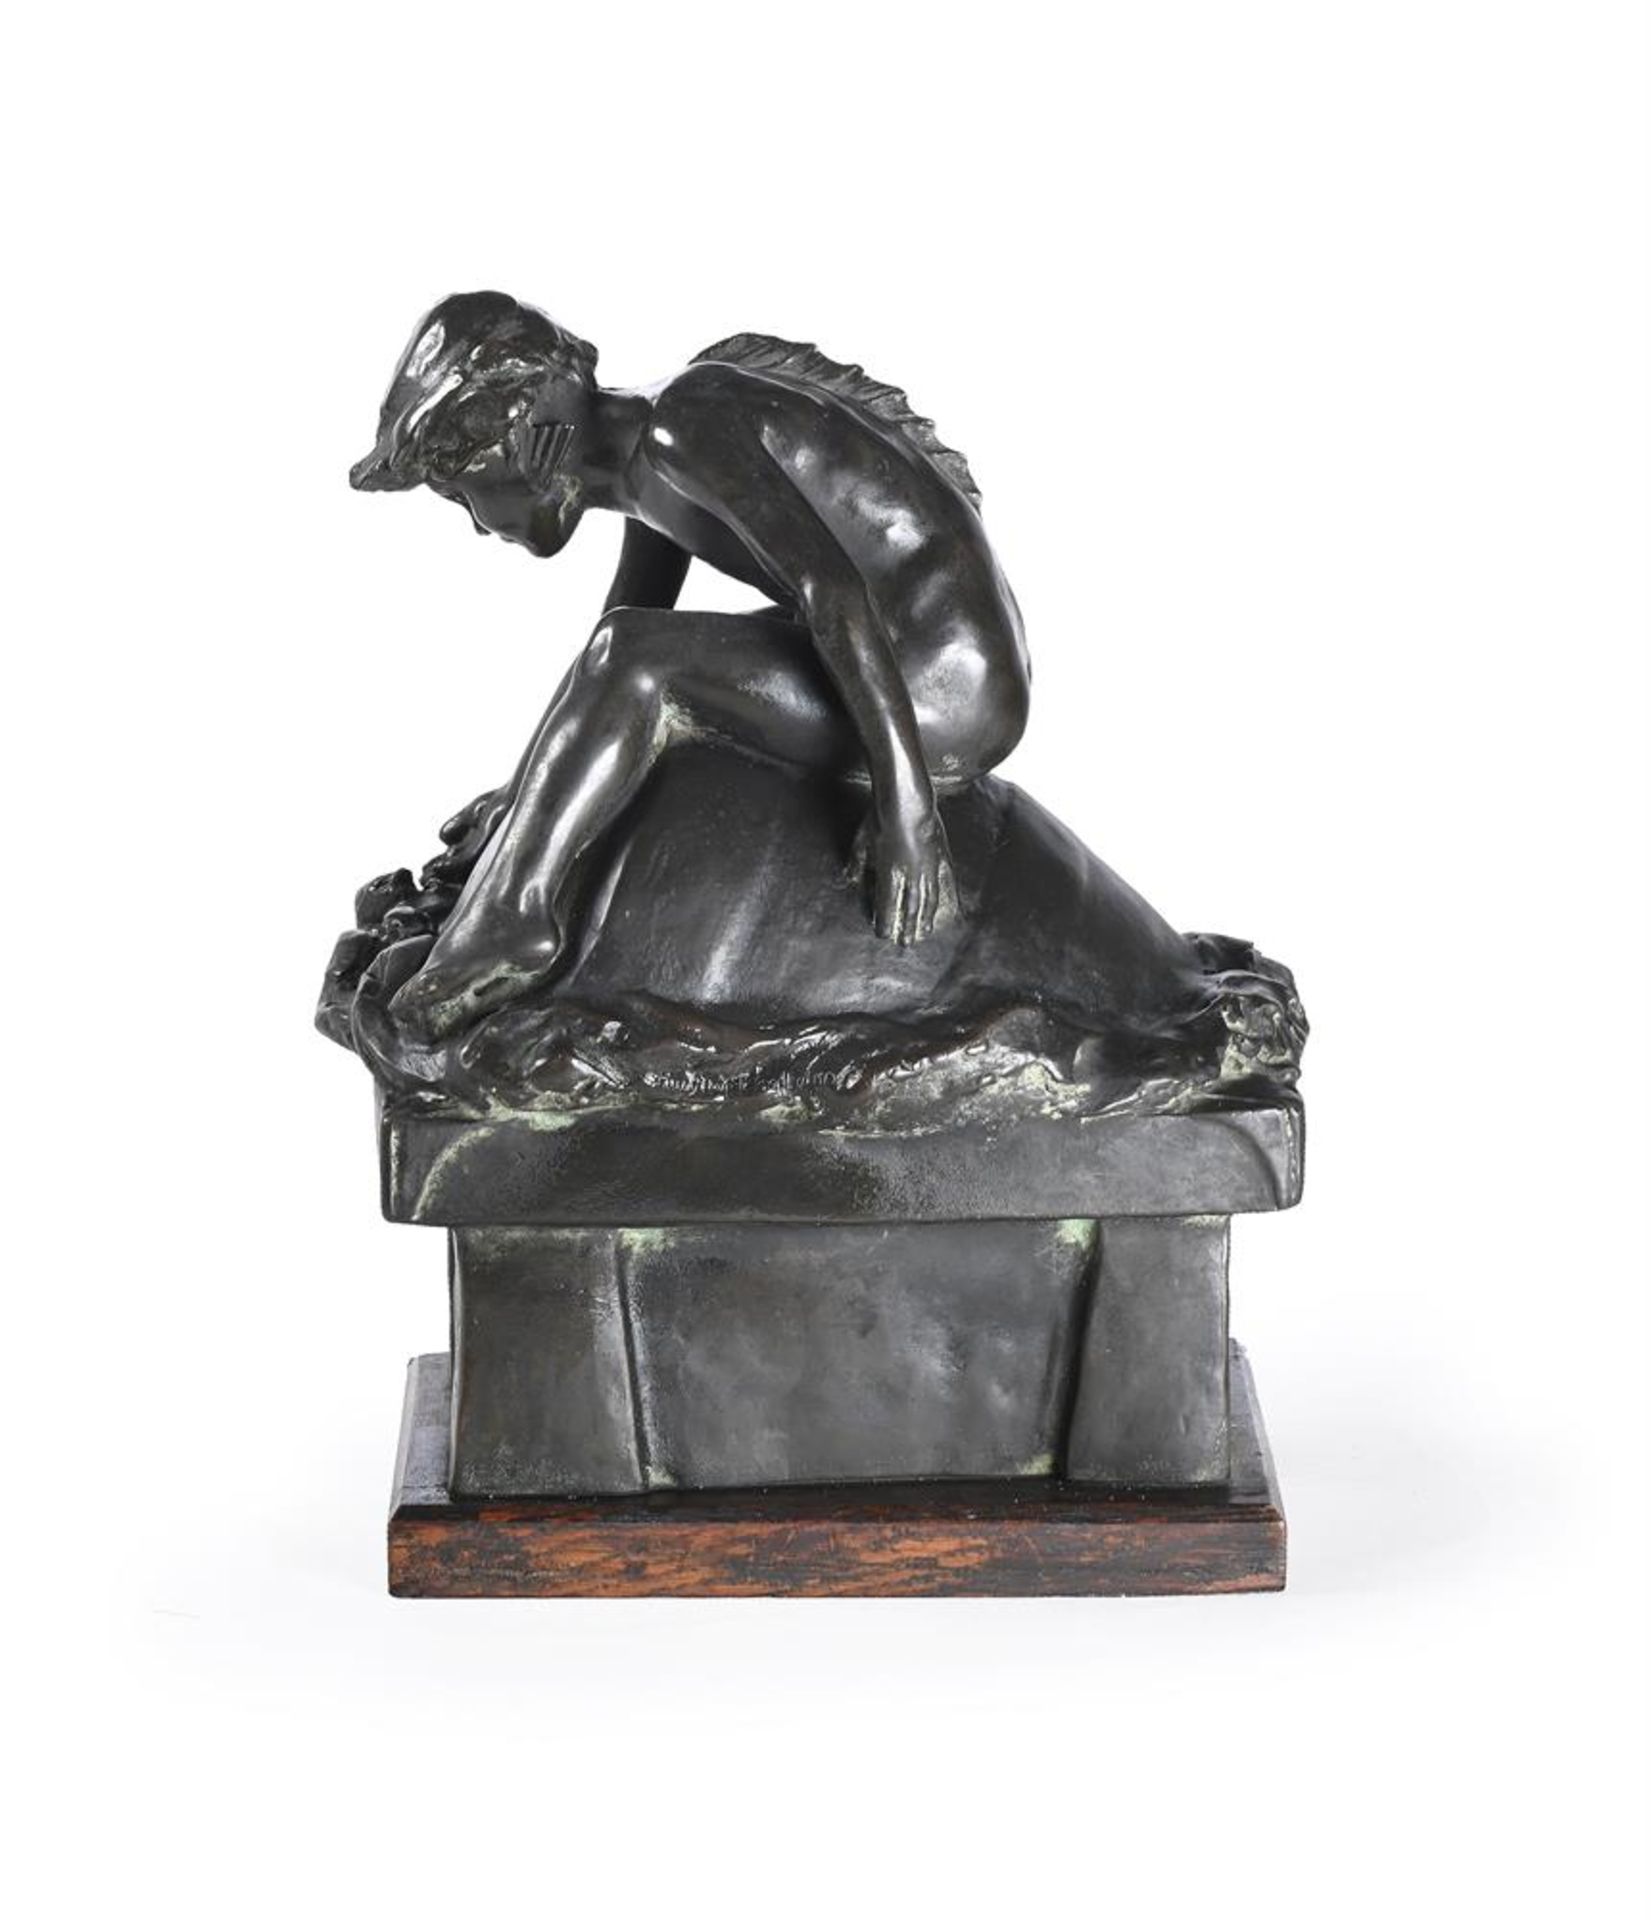 RUBY LEVICK BAILEY (WELSH, 1871-1940), A BRONZE GROUP OF A MERCHILD ON A FLOATING BARREL, DATED 1912 - Image 3 of 4